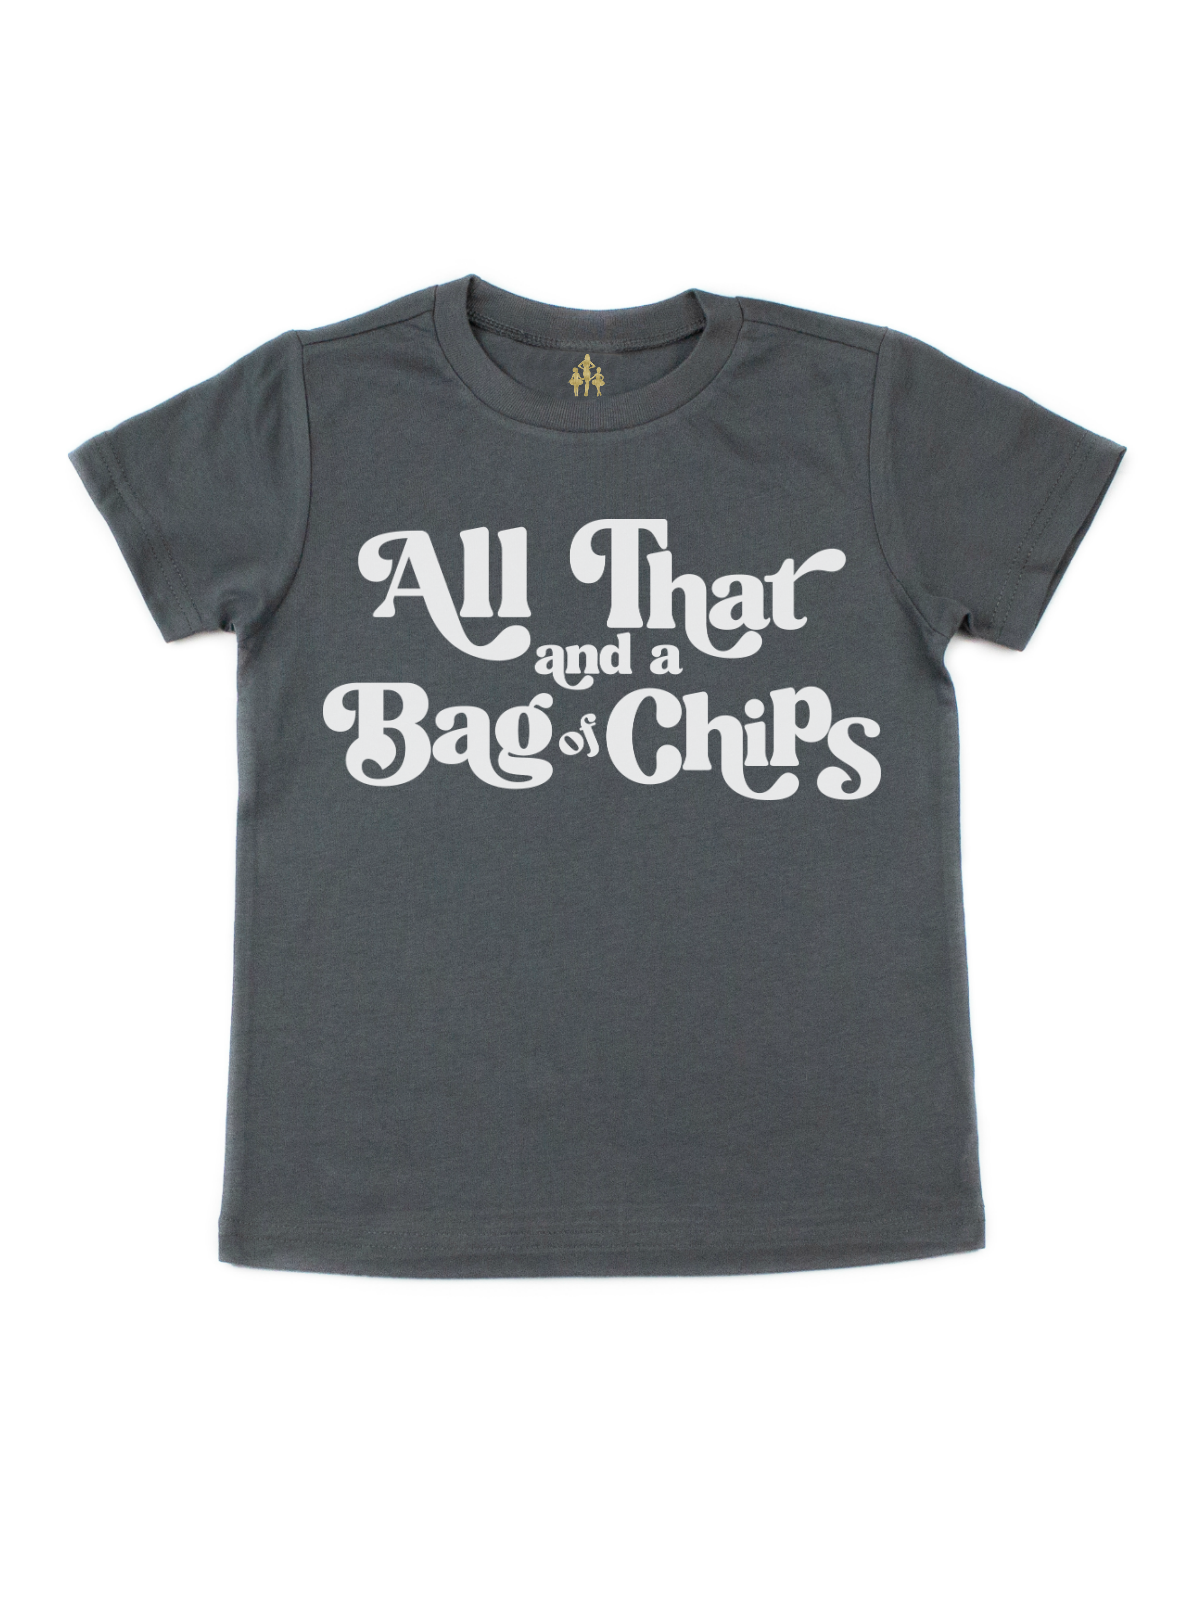 All That and a Bag of Chips Kids Gray Shirt